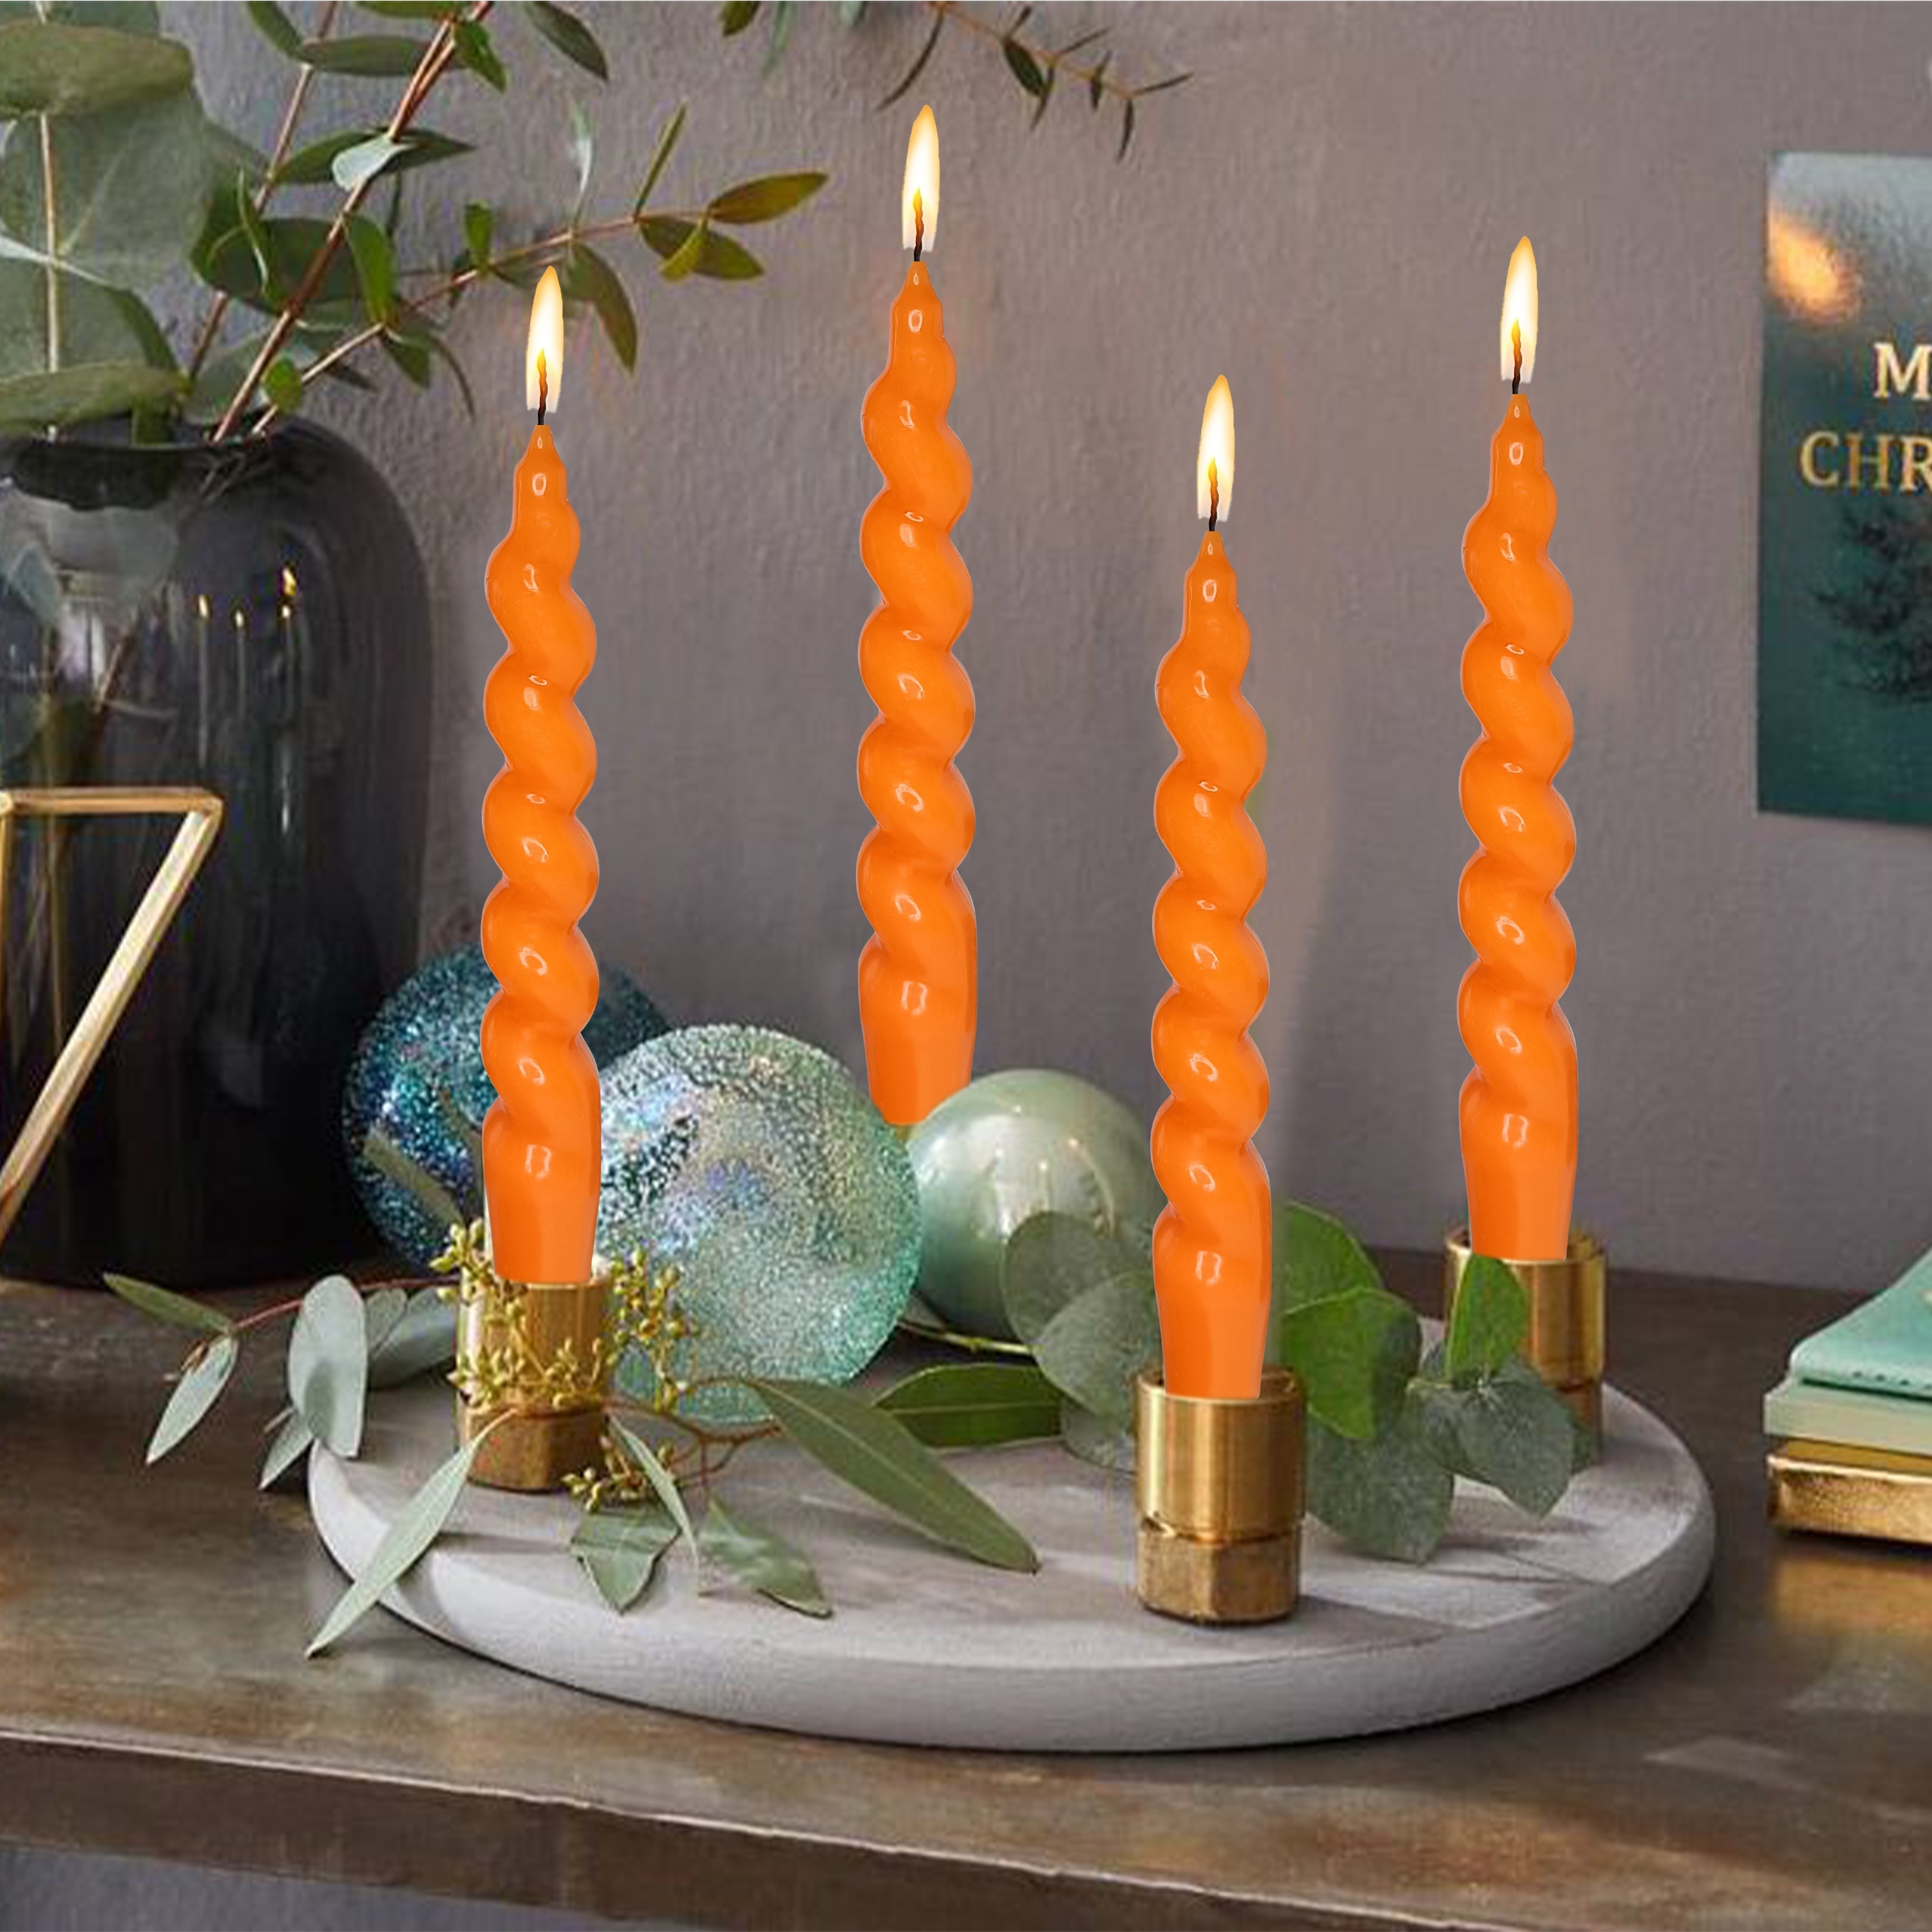  Spiral Taper Candle Dinner Candlesticks 7.5 INCH Orange Tapered  Candles Unscented Wax Twisted Candle for Home Décor Weddings Festive  Seasons Holiday : Home & Kitchen